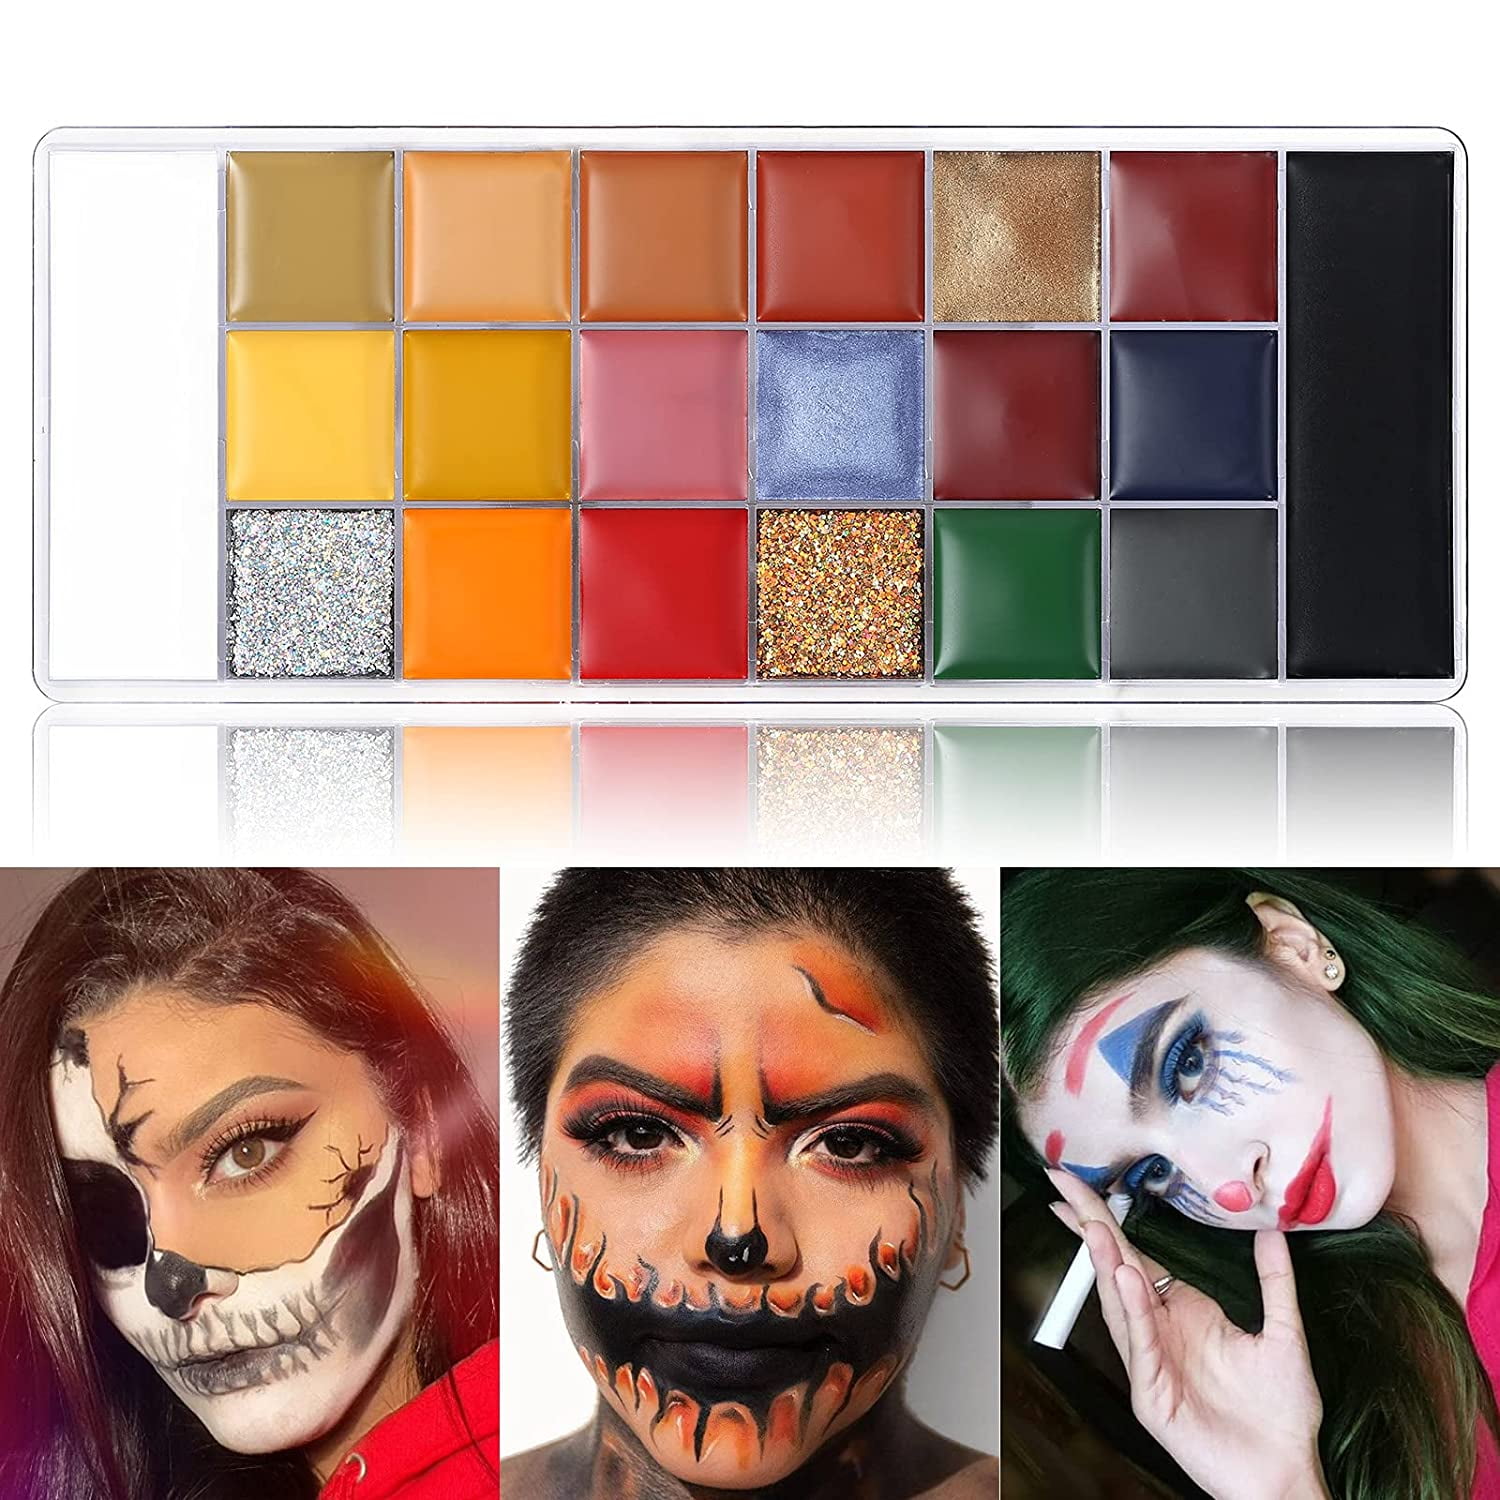  UCANBE 20 Colors Body Face Paint Palette for Adults Kids -  Large Pan Black White Non Toxic Oil Art Camouflage Halloween Cosplay SFX  Makeup Painting Kit (02) : Arts, Crafts & Sewing